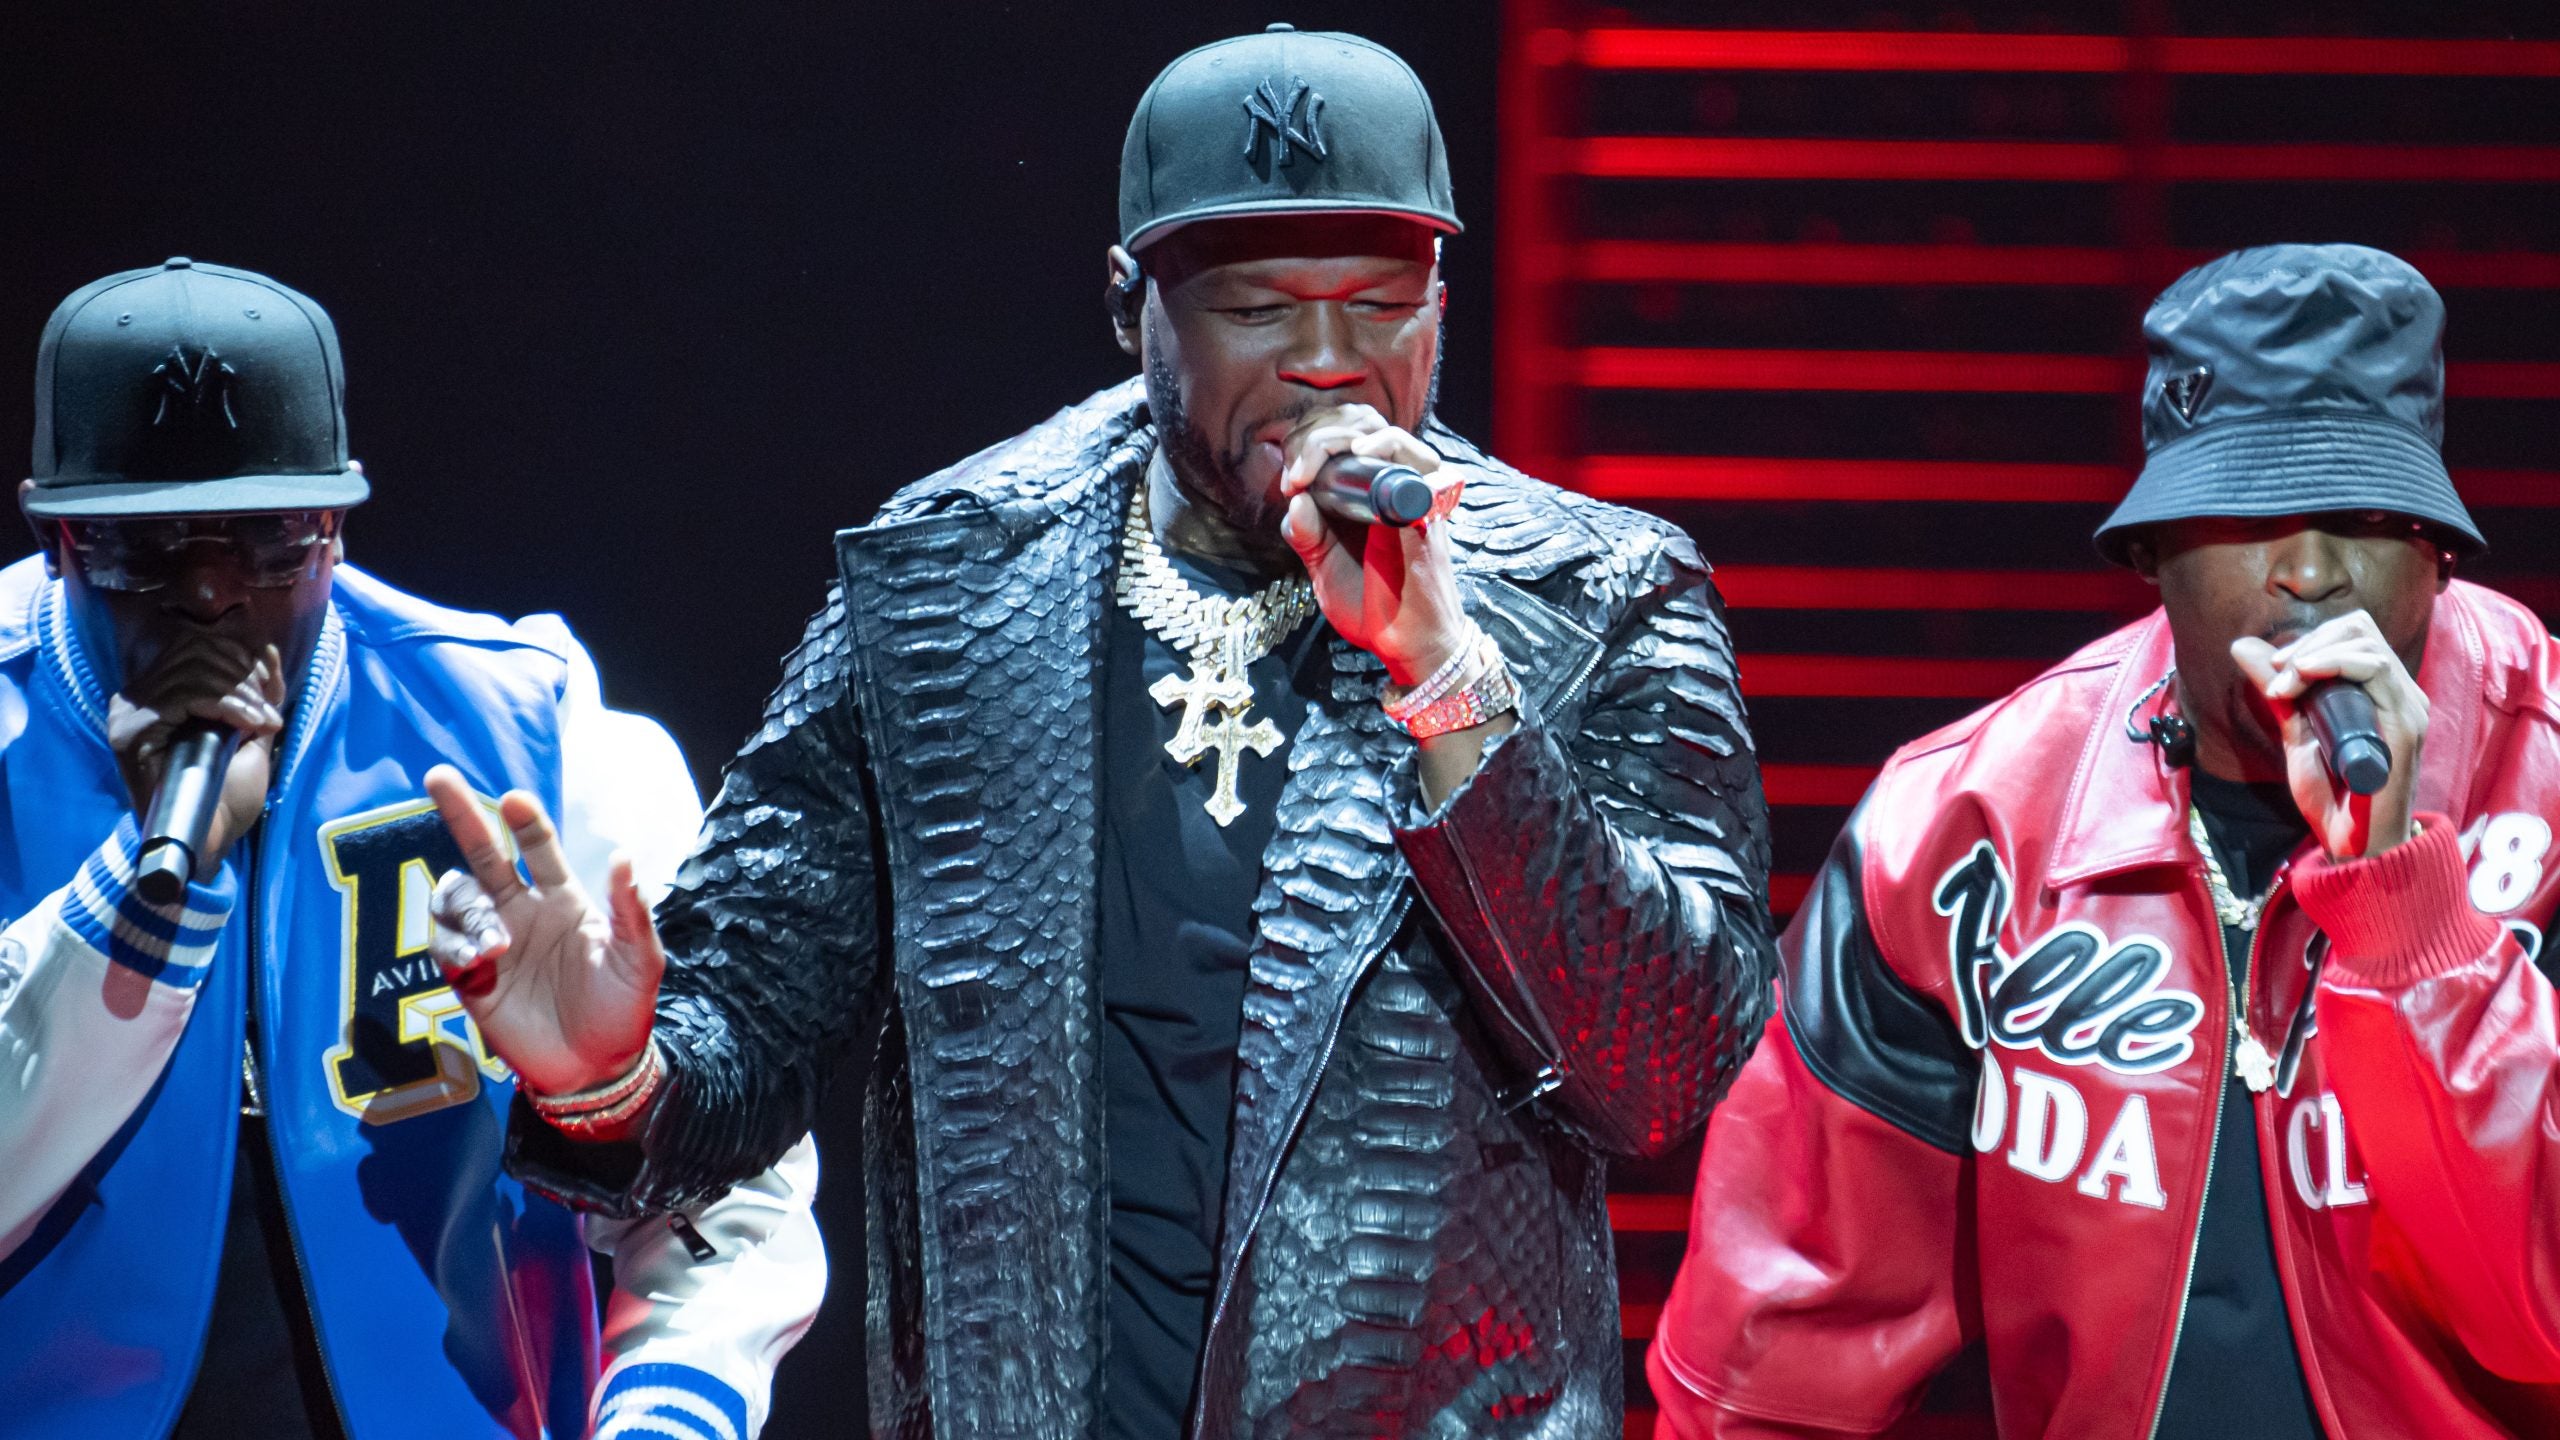 50 Cent's Rodeo Houston Performance Was A Celebration Of Black Heritage